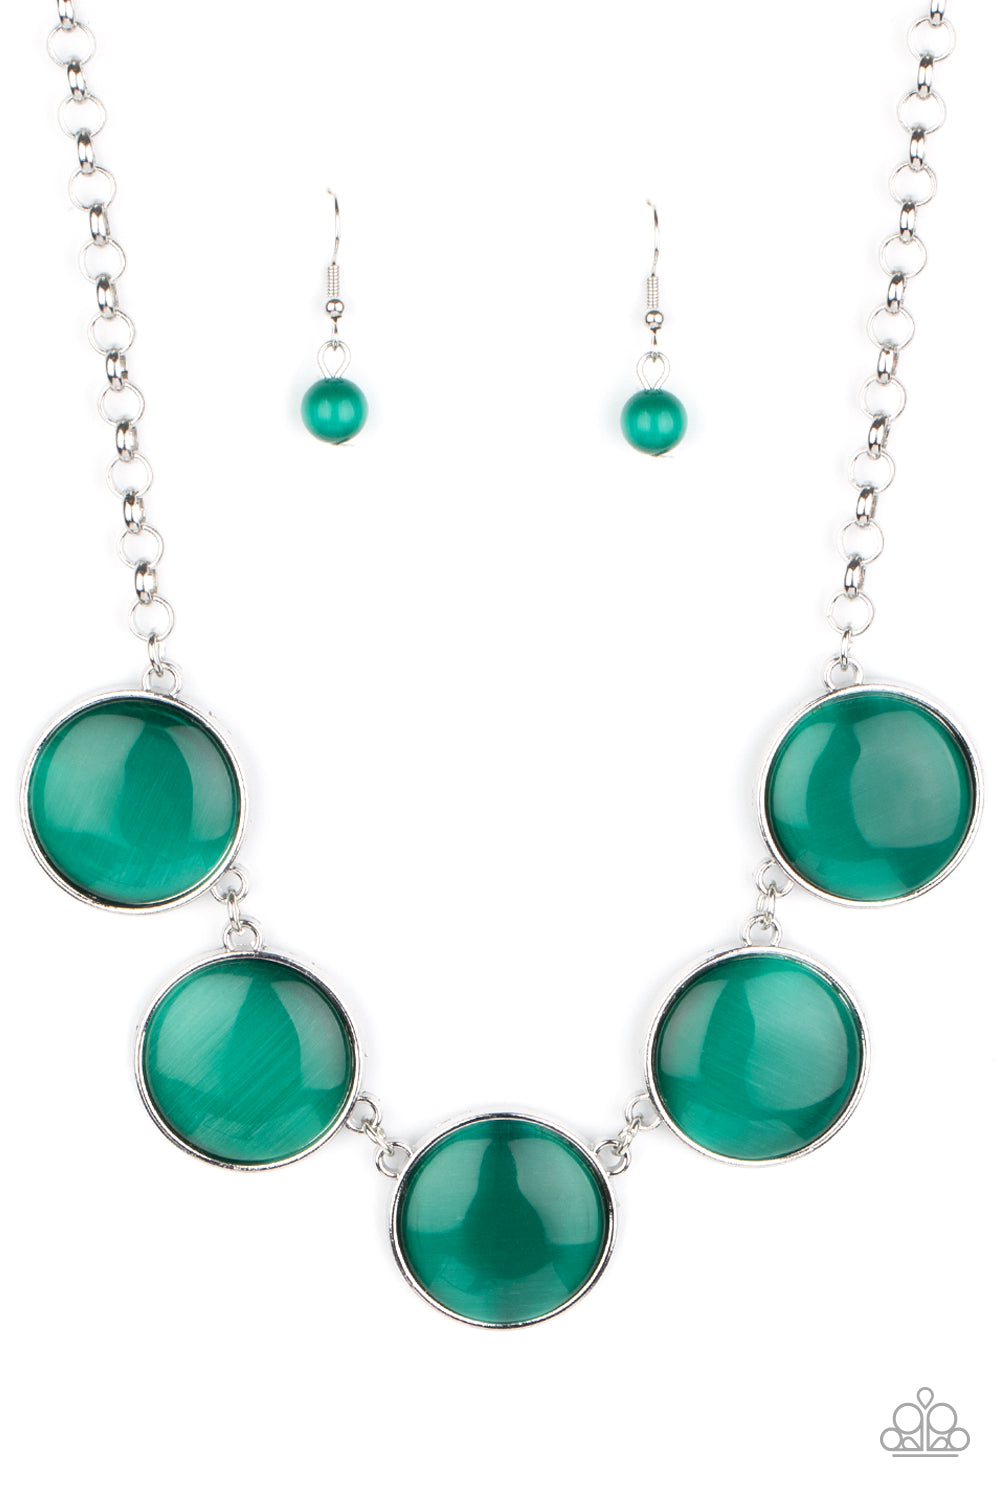 Paparazzi Necklace - Ethereal Escape - Green